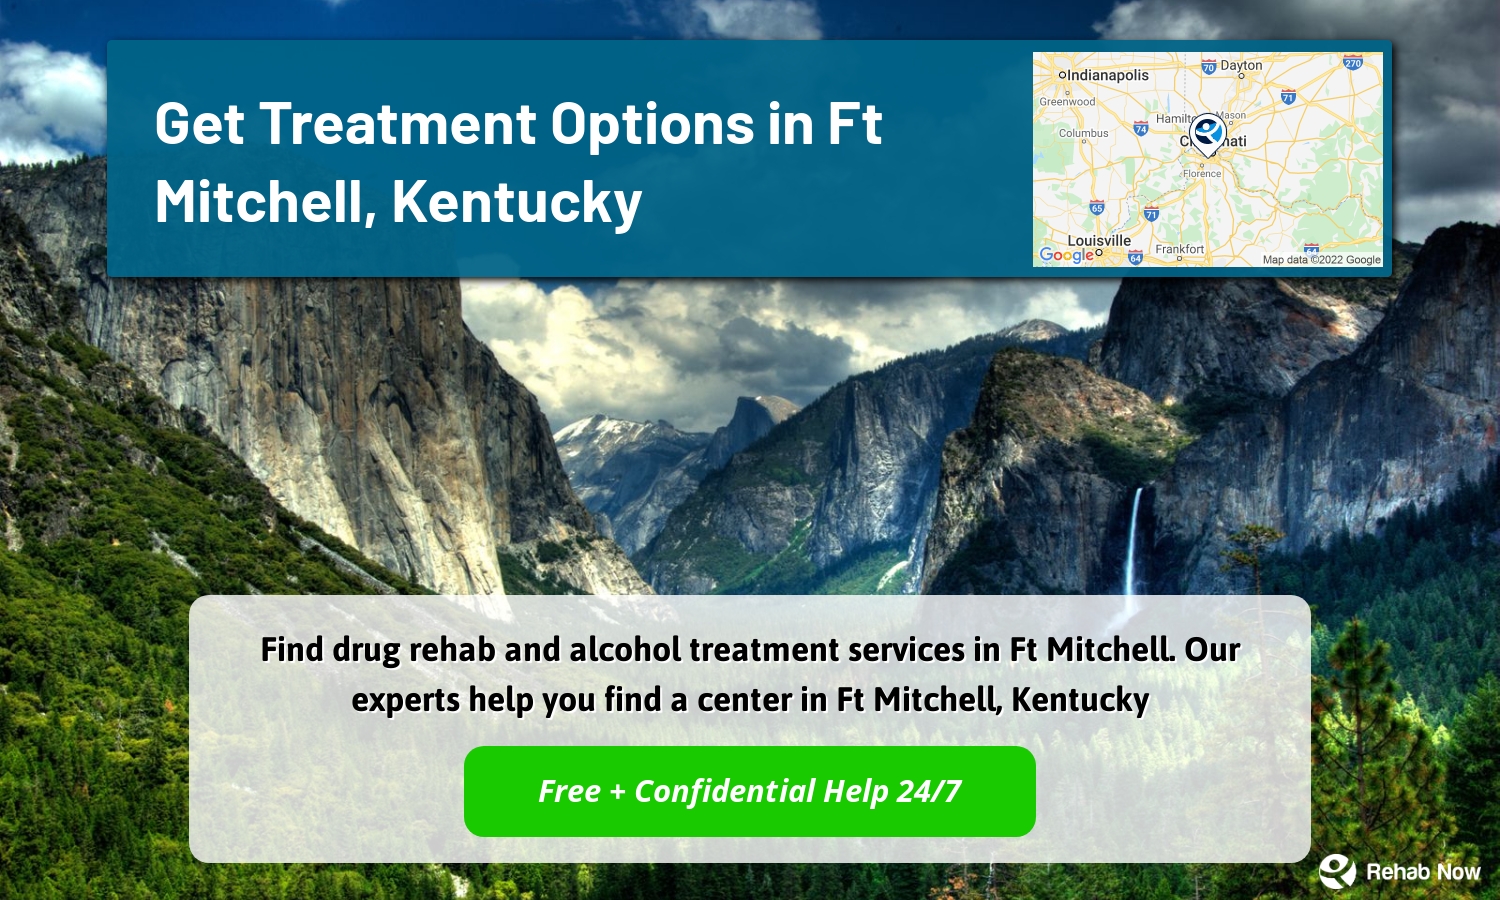 Find drug rehab and alcohol treatment services in Ft Mitchell. Our experts help you find a center in Ft Mitchell, Kentucky